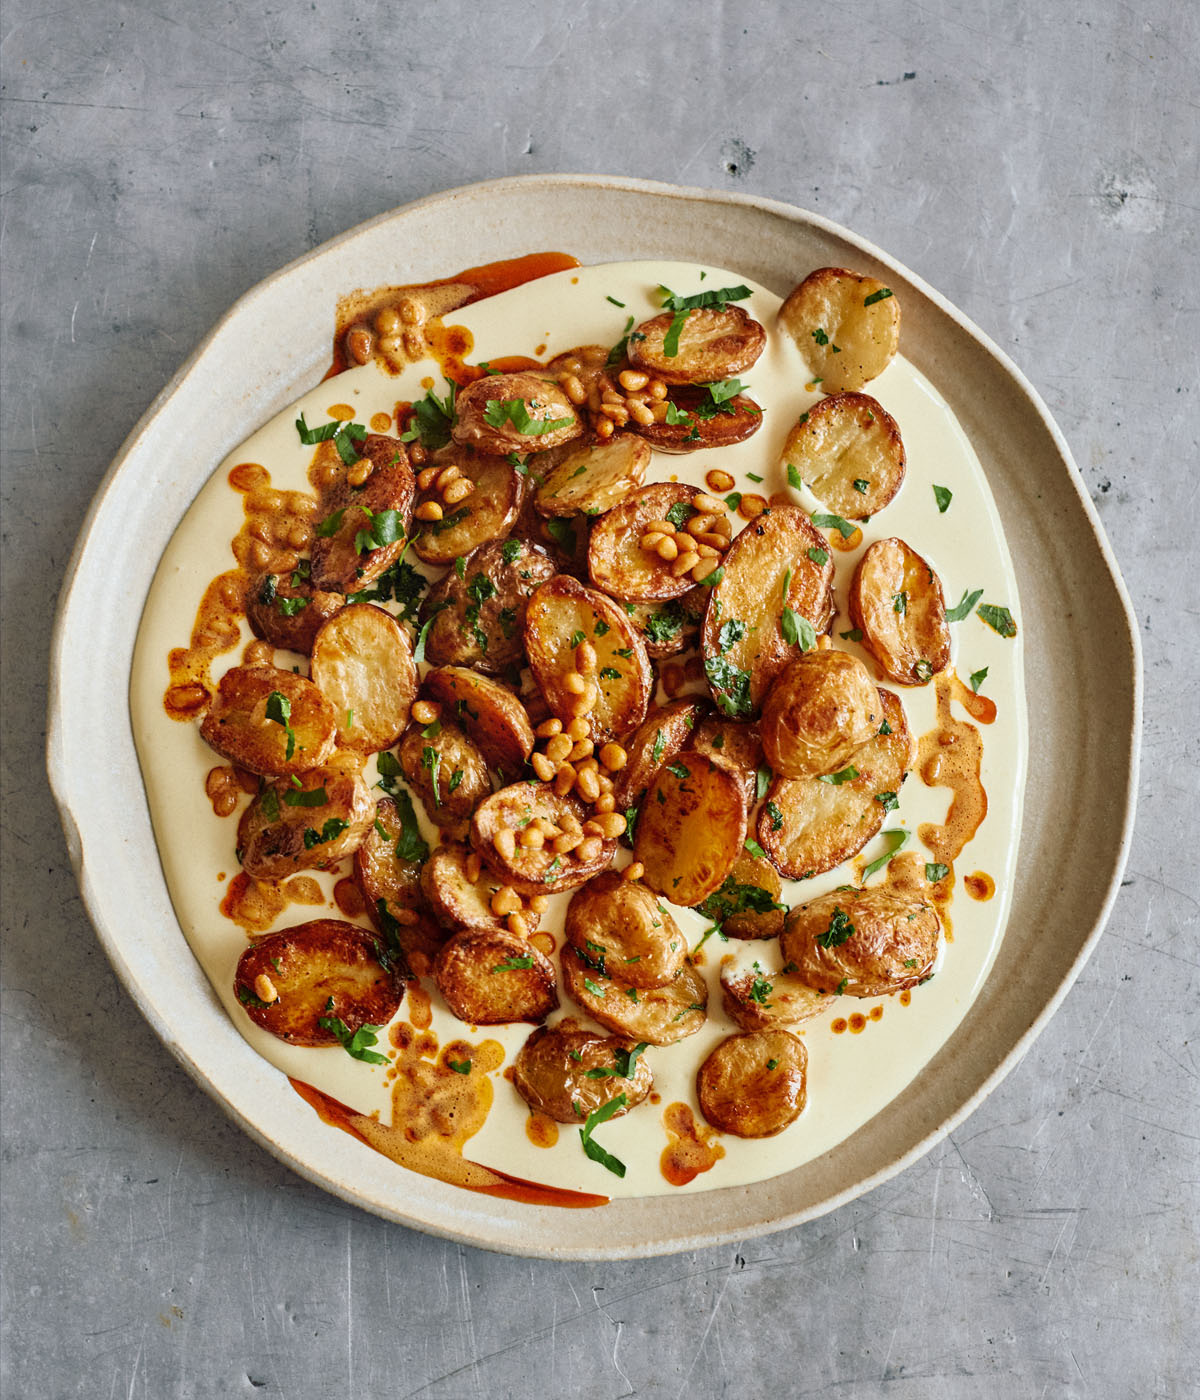 Image of Noor Murad and Yotam Ottolenghi's Roasted Potatoes with Aioli and Buttered Pinenuts